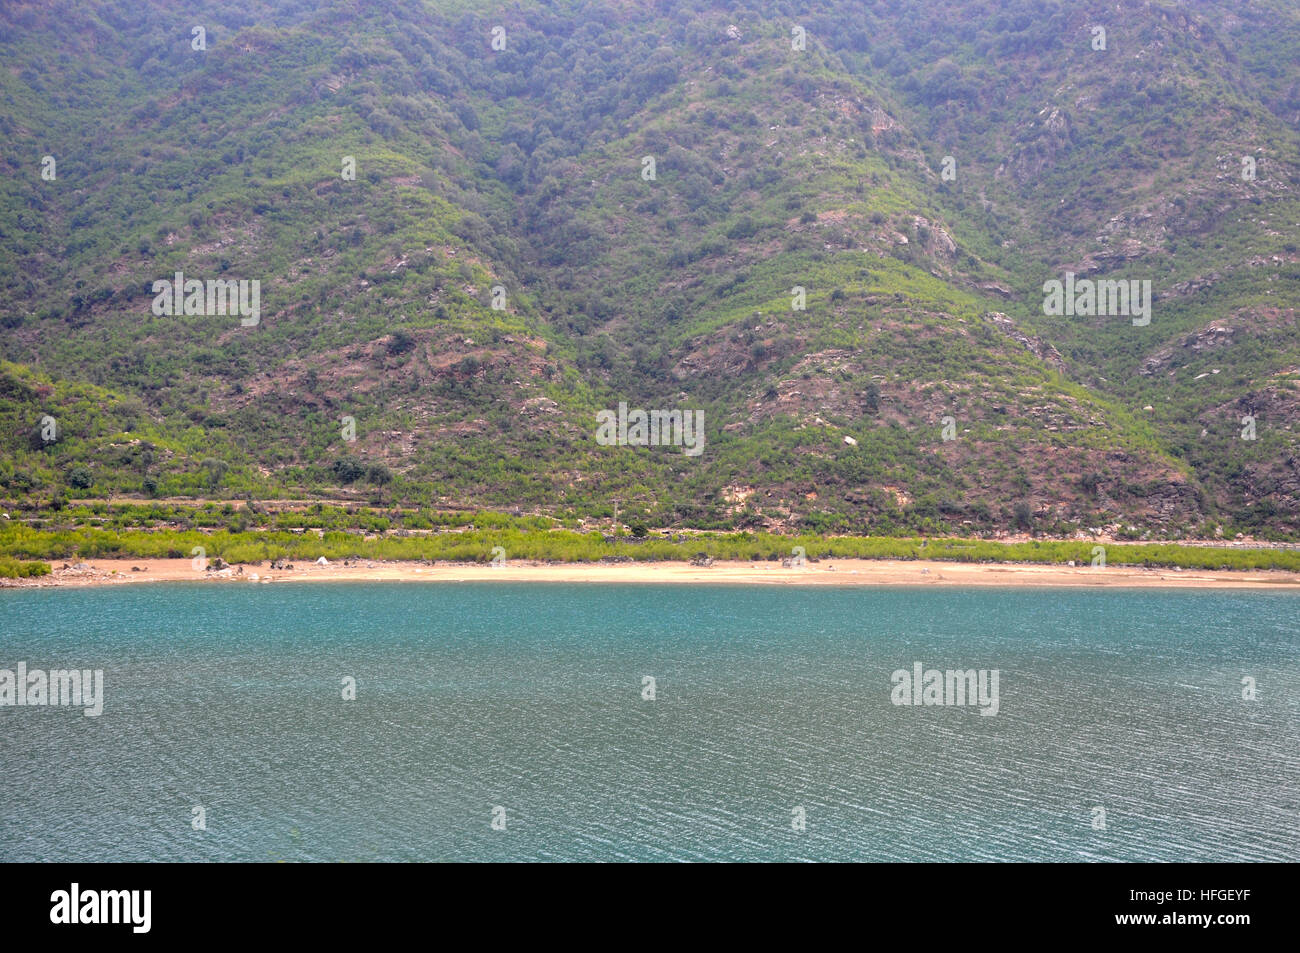 Coastal area along the mountain from up above Stock Photo